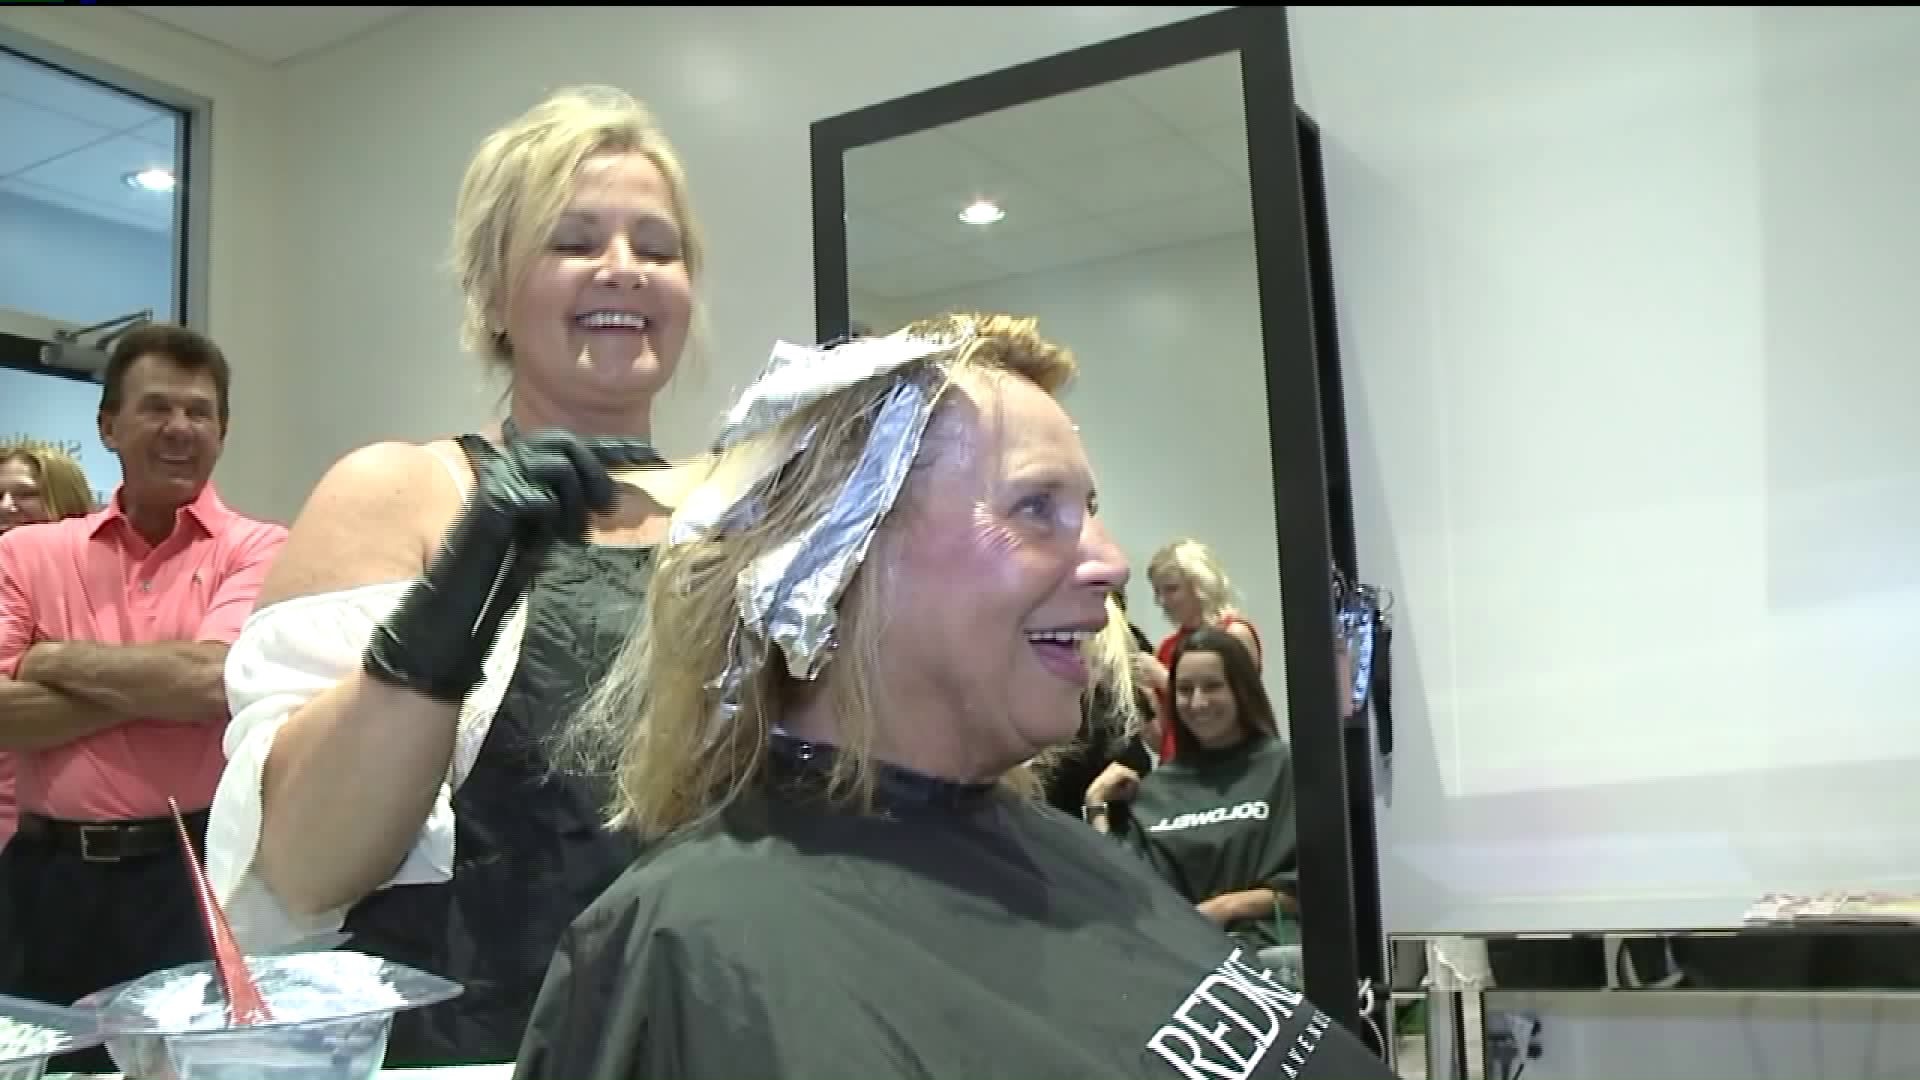 First Salon Suite Opens its Doors in Luzerne County as Trend Sweeps Nation